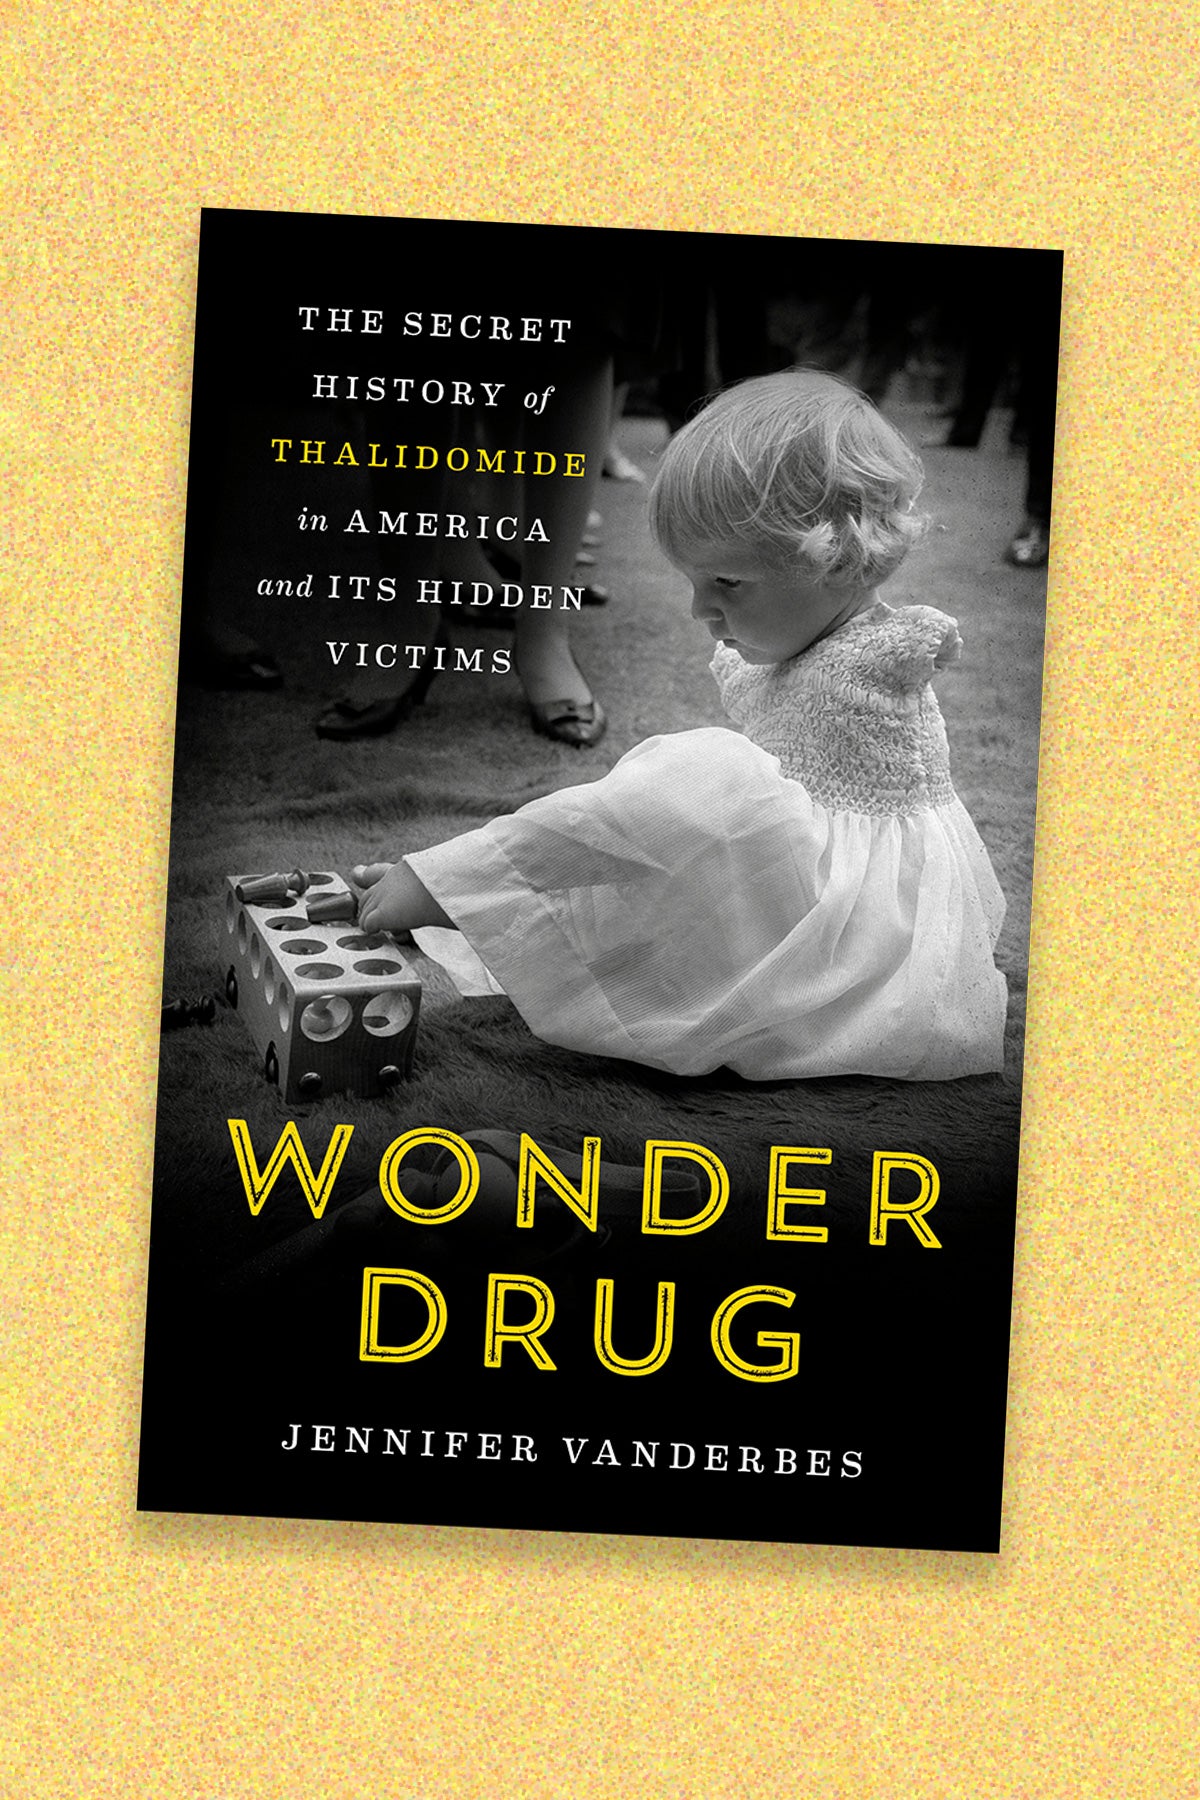 The book cover for “Wonder Drug: The secret history of thalidomide in American and its hidden victims” by Jennifer Vanderbes on a yellow speckled background. The book cover is black and has a black and white photo of a toddler-aged girl in a dress with no arms. She uses her toys to play with a wooden toy.